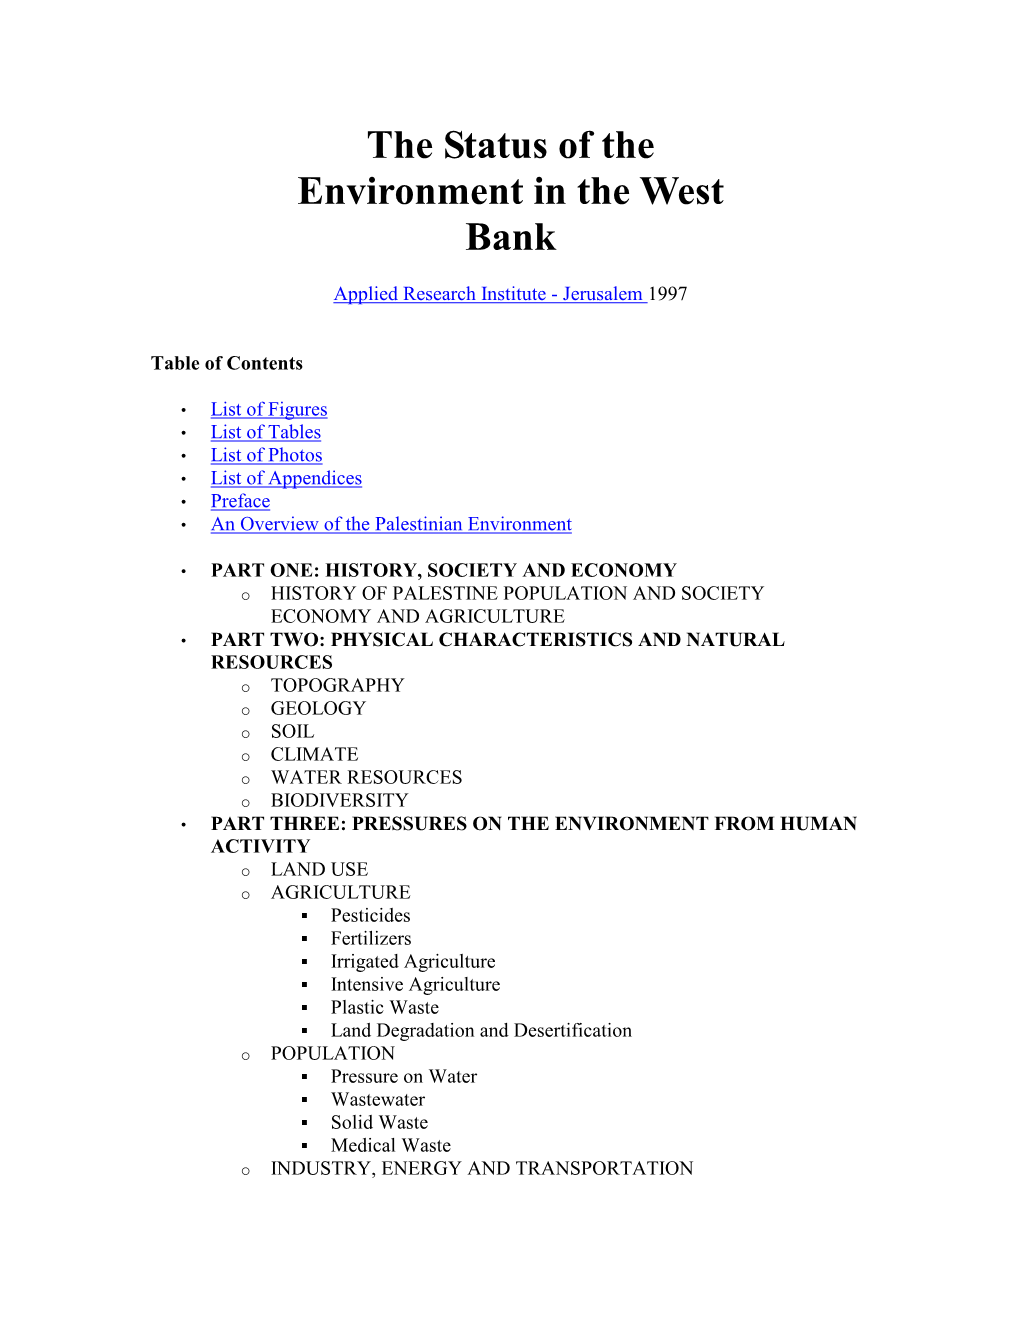 The Status of the Environment in the West Bank